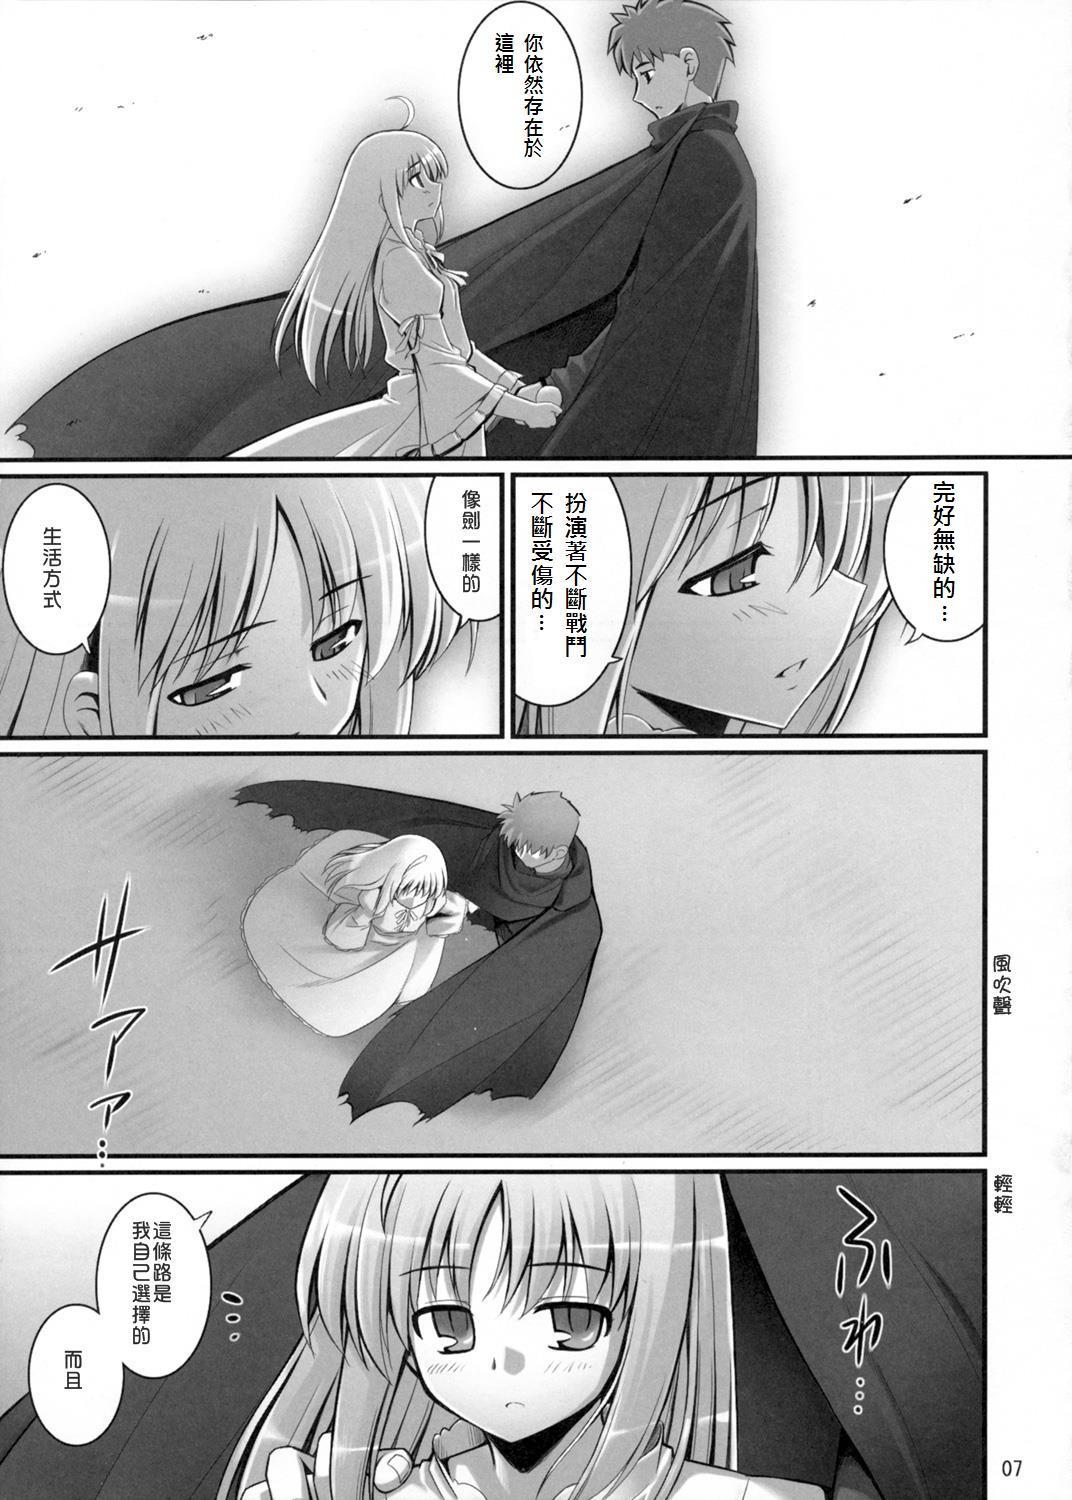 Bald Pussy RE 06 - Fate stay night Guyonshemale - Page 7